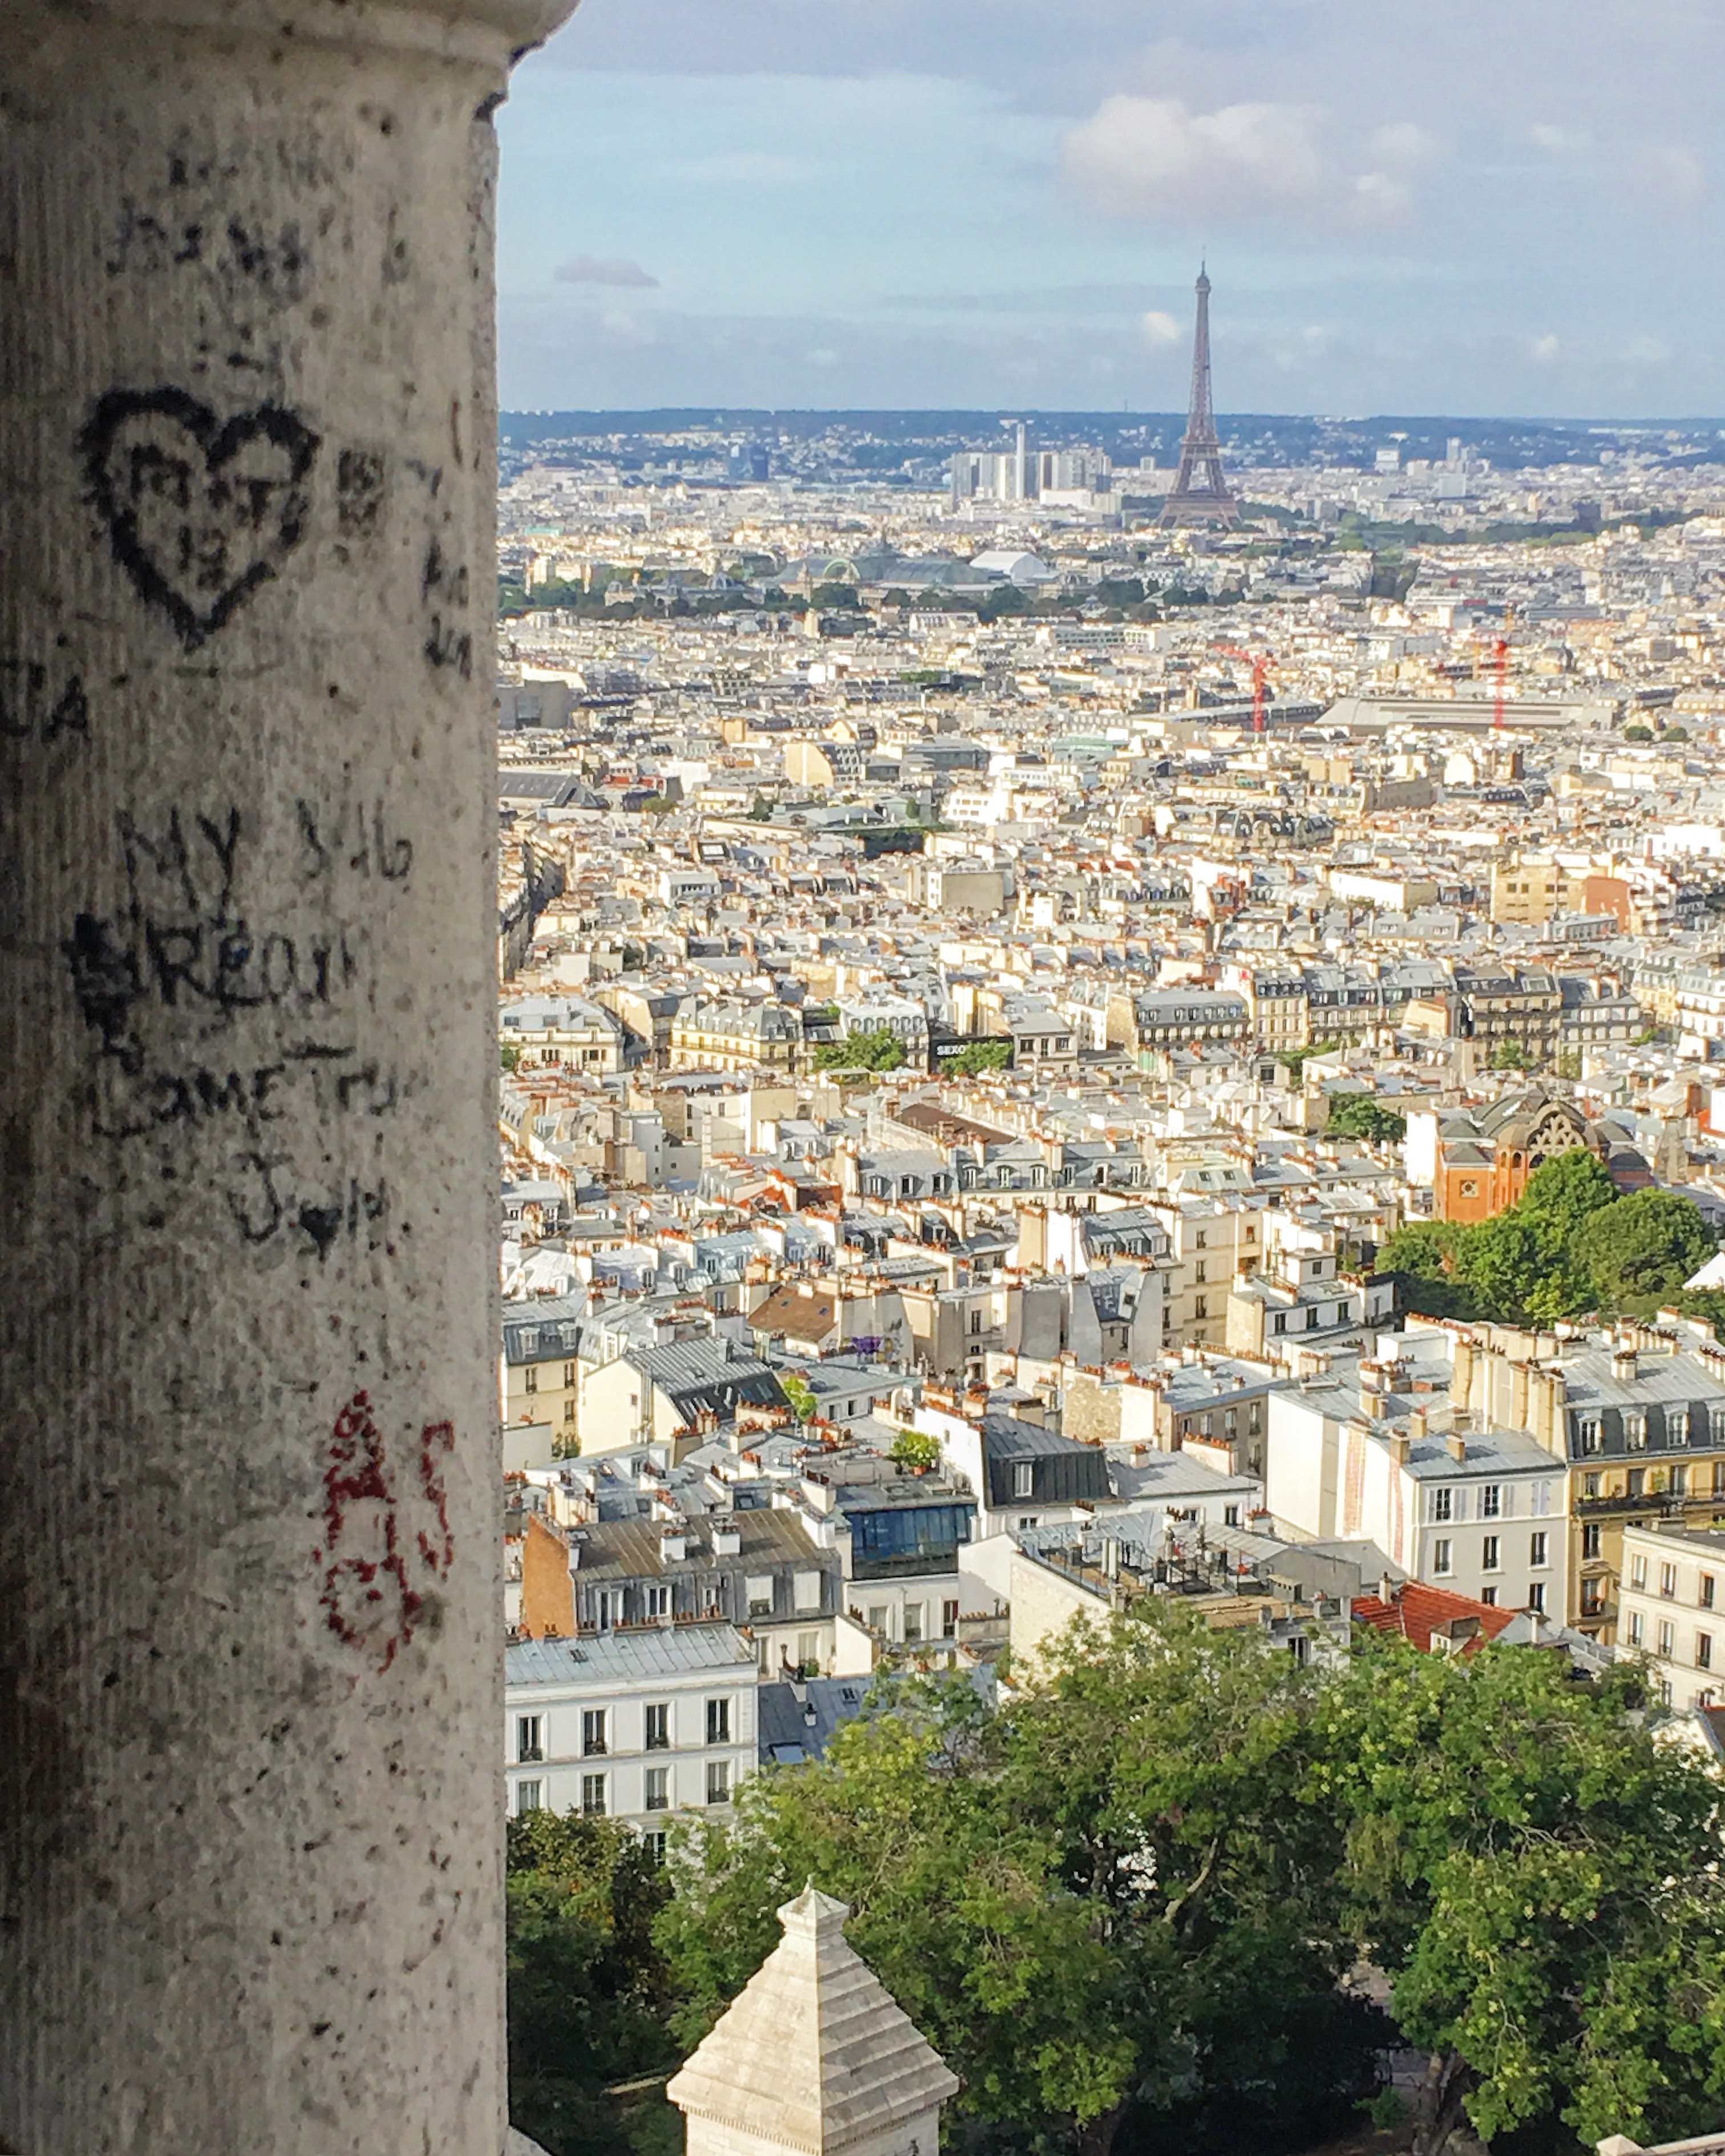 Views from the dome of Sacre Coeur